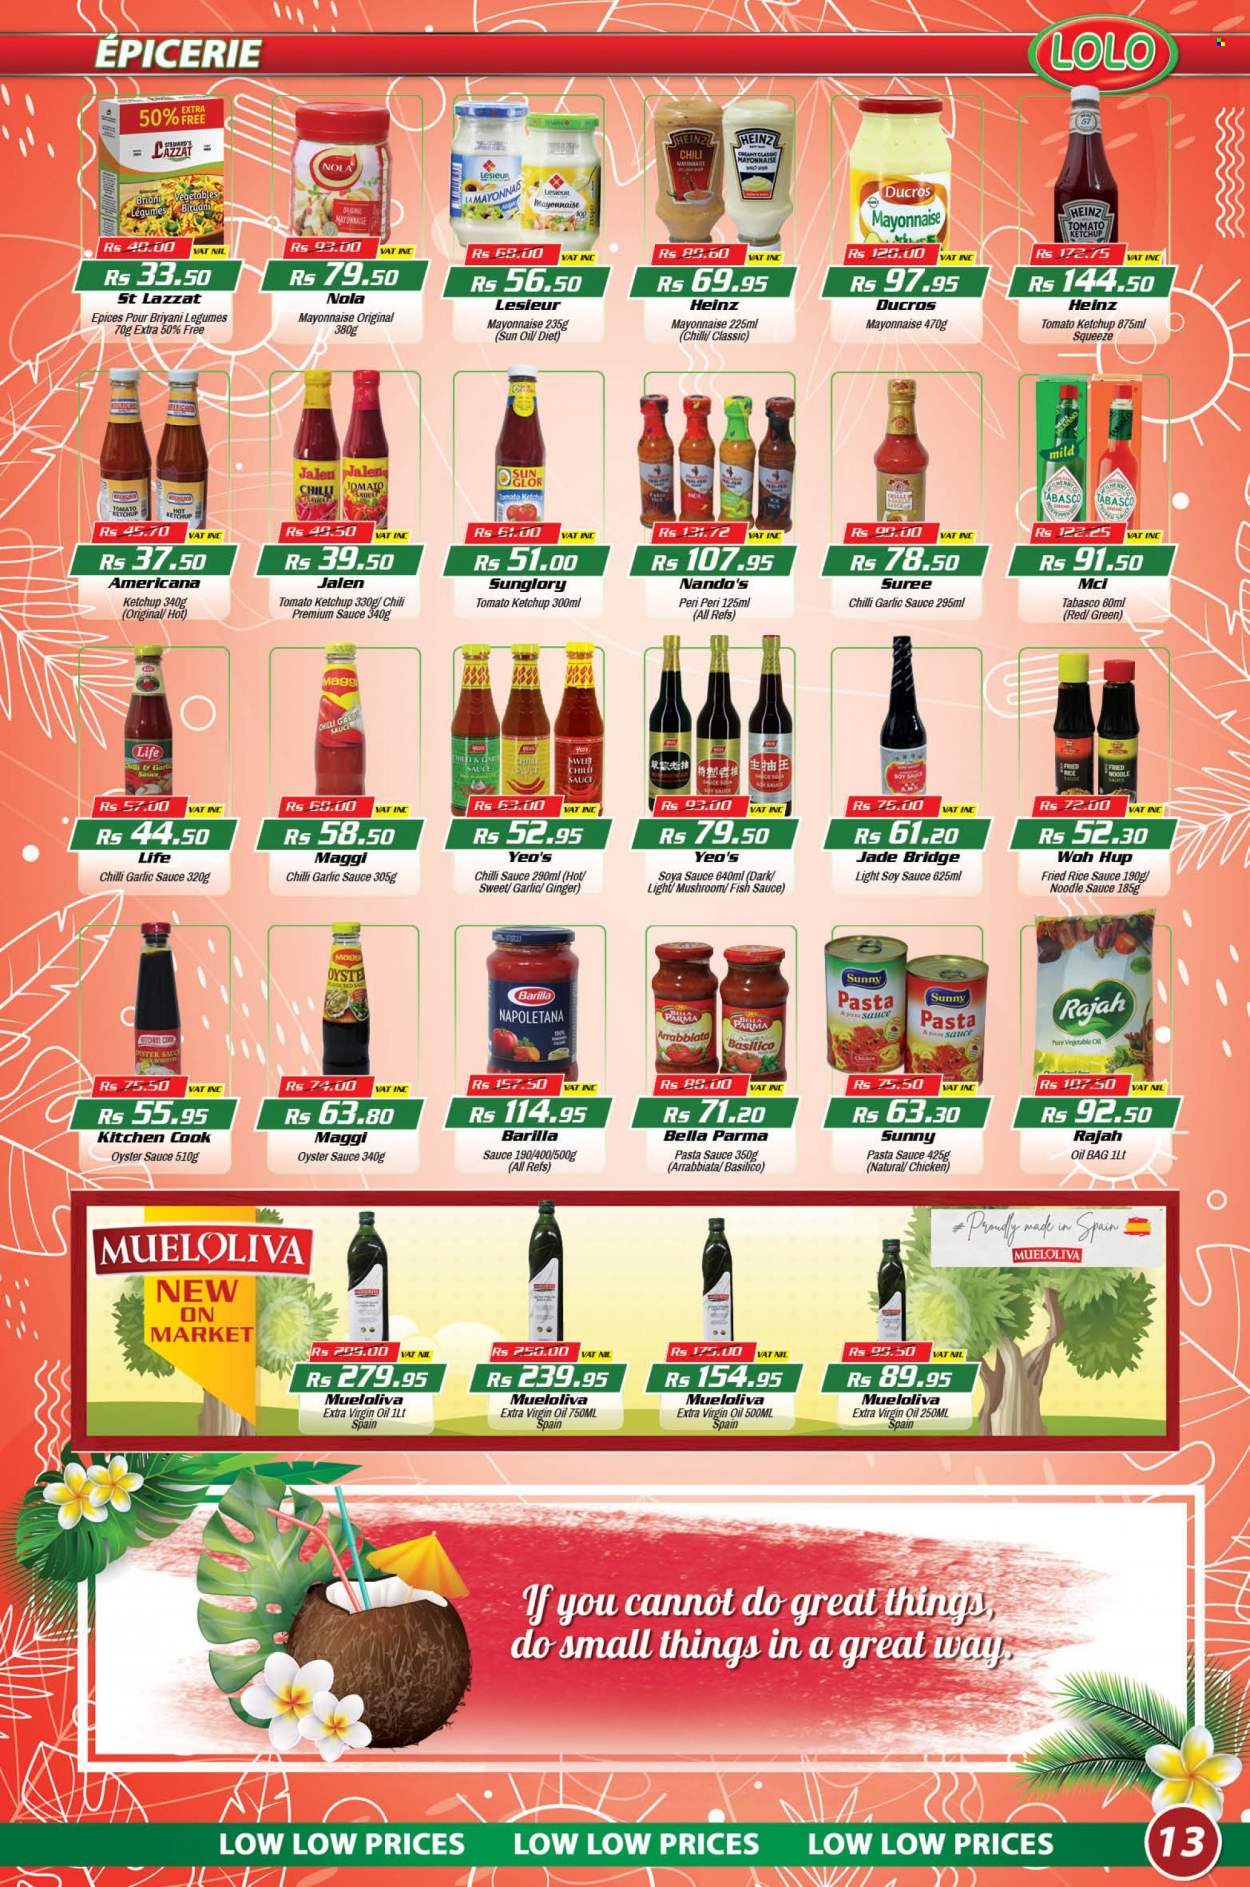 thumbnail - LOLO Hyper Catalogue - 26.08.2022 - 15.09.2022 - Sales products - mushrooms, Bella, ginger, oysters, fish, pasta sauce, noodles, mayonnaise, tabasco, Maggi, fish sauce, soy sauce, oyster sauce, chilli sauce, sweet chilli sauce, garlic sauce, extra virgin olive oil, vegetable oil, oil, bag, Heinz, ketchup, Barilla. Page 13.